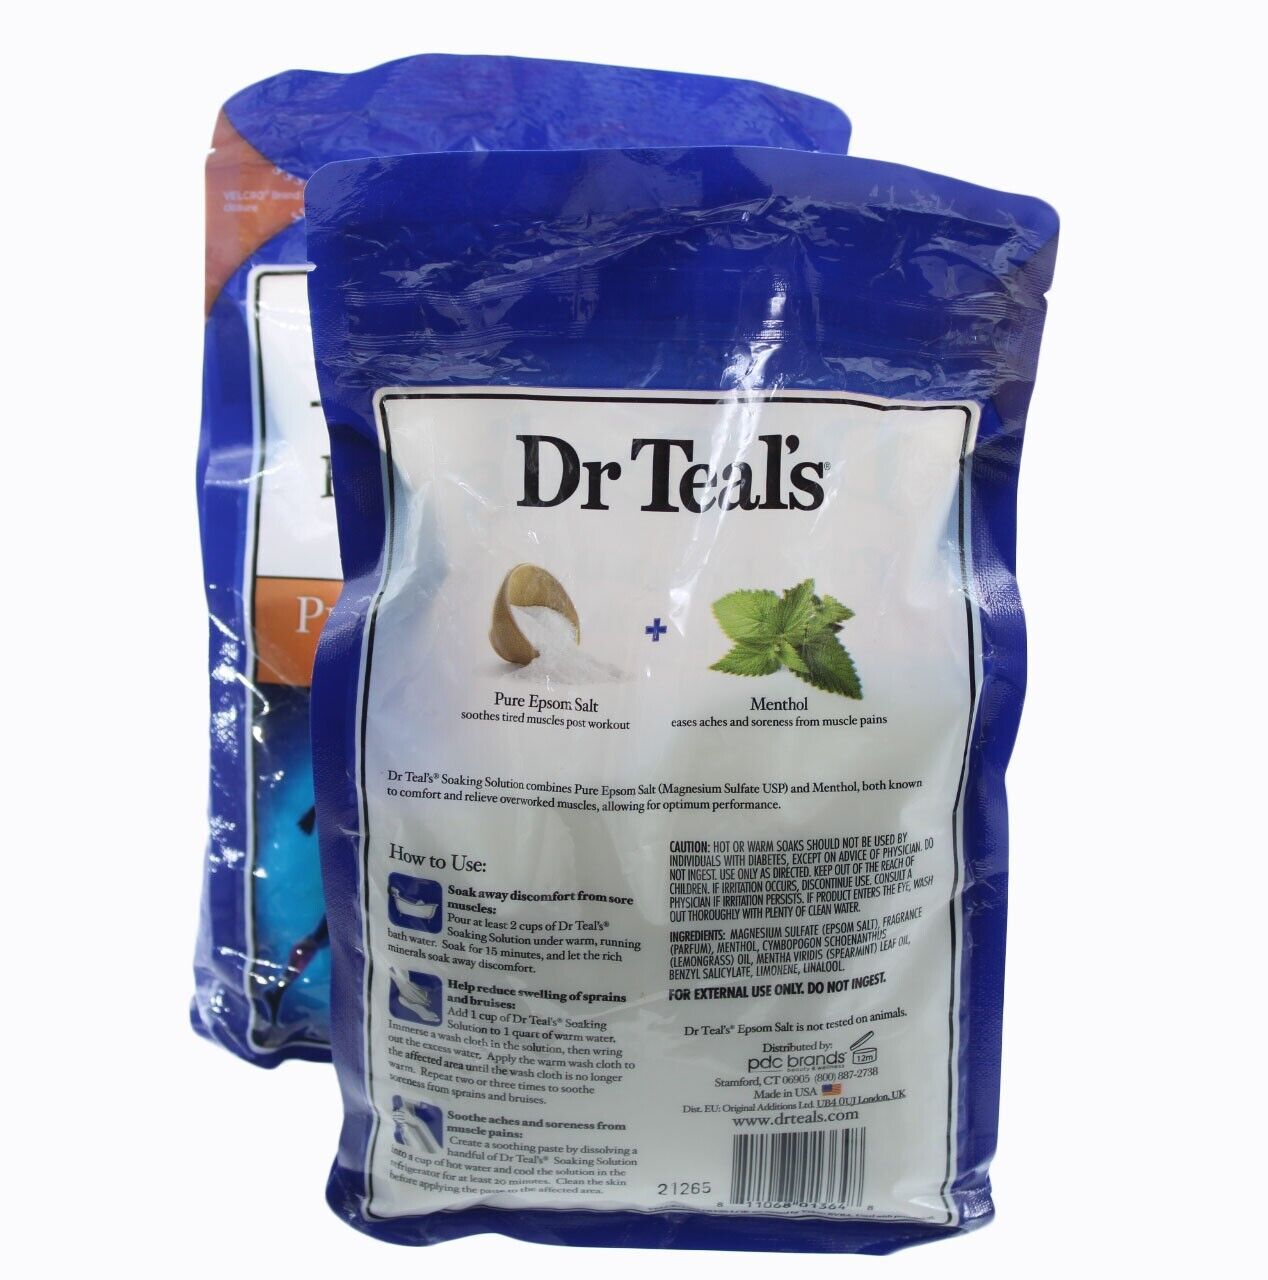 Dr Teal s Pure Epsom Salt Soak  Pre & Post Workout with Menthol  3 lbs 2 Pack - $4.64